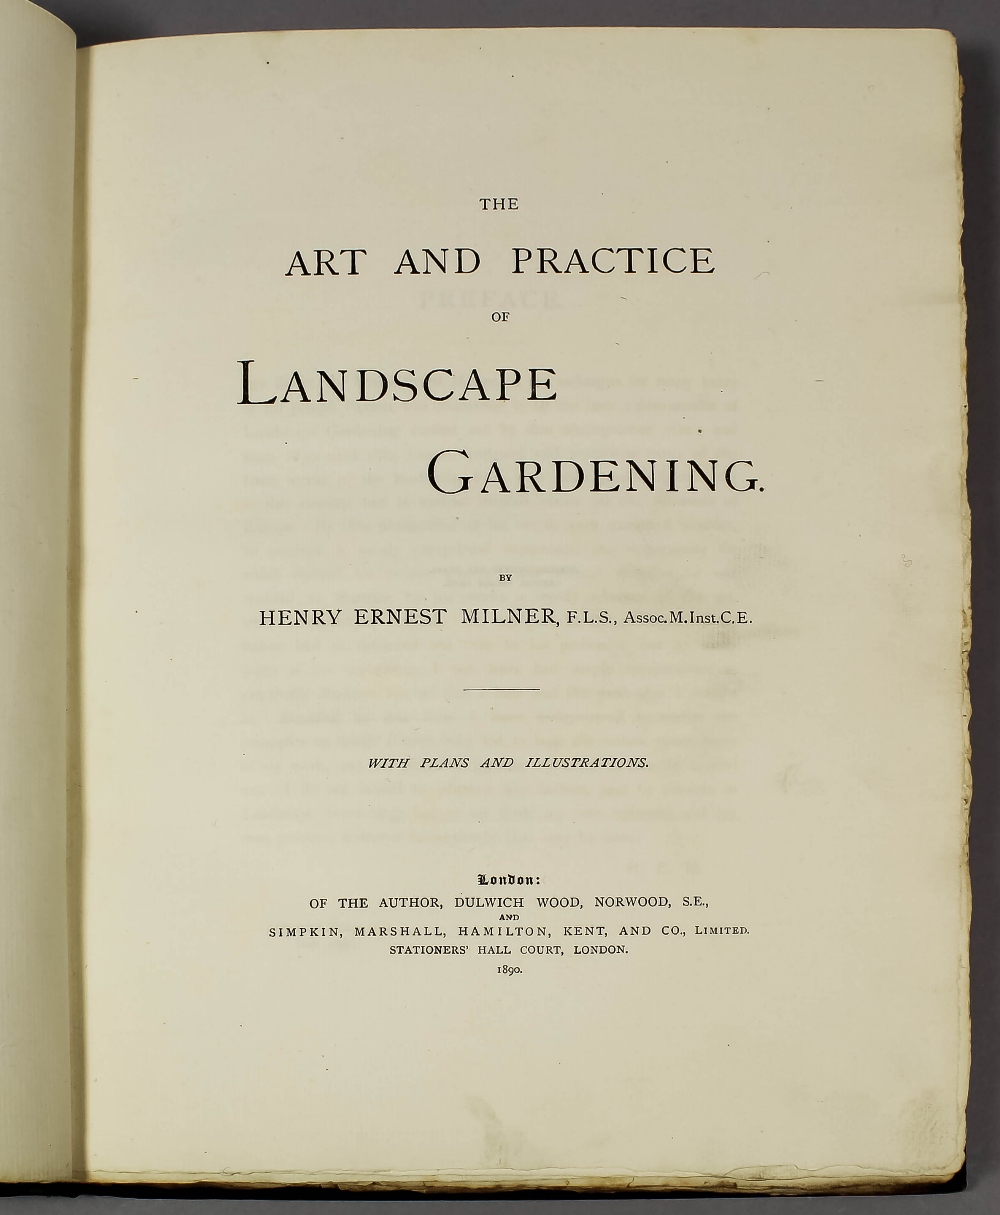 Henry Ernest Milner - "The Art and Practice of Landscape Gardening" published by the author and